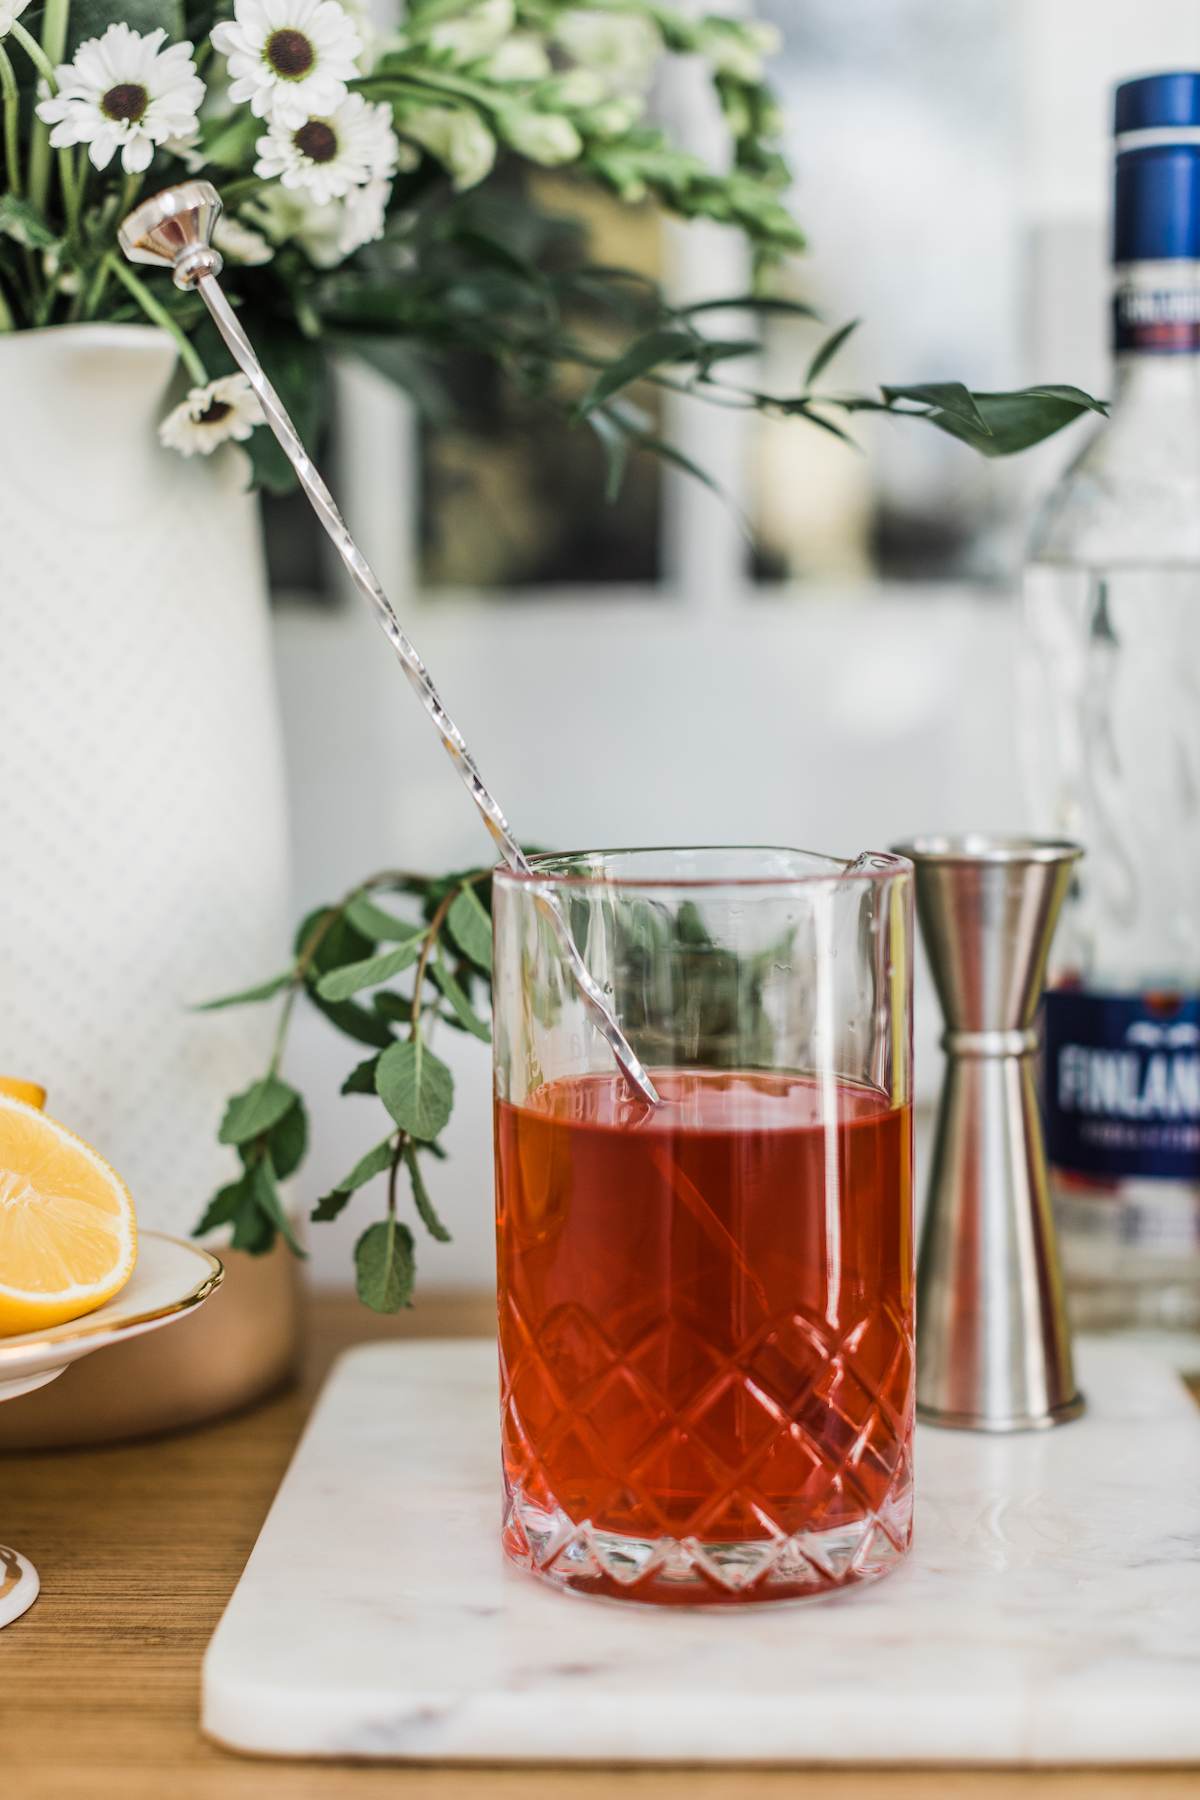 How to Make Kentucky Derby Oaks Lily Cocktail